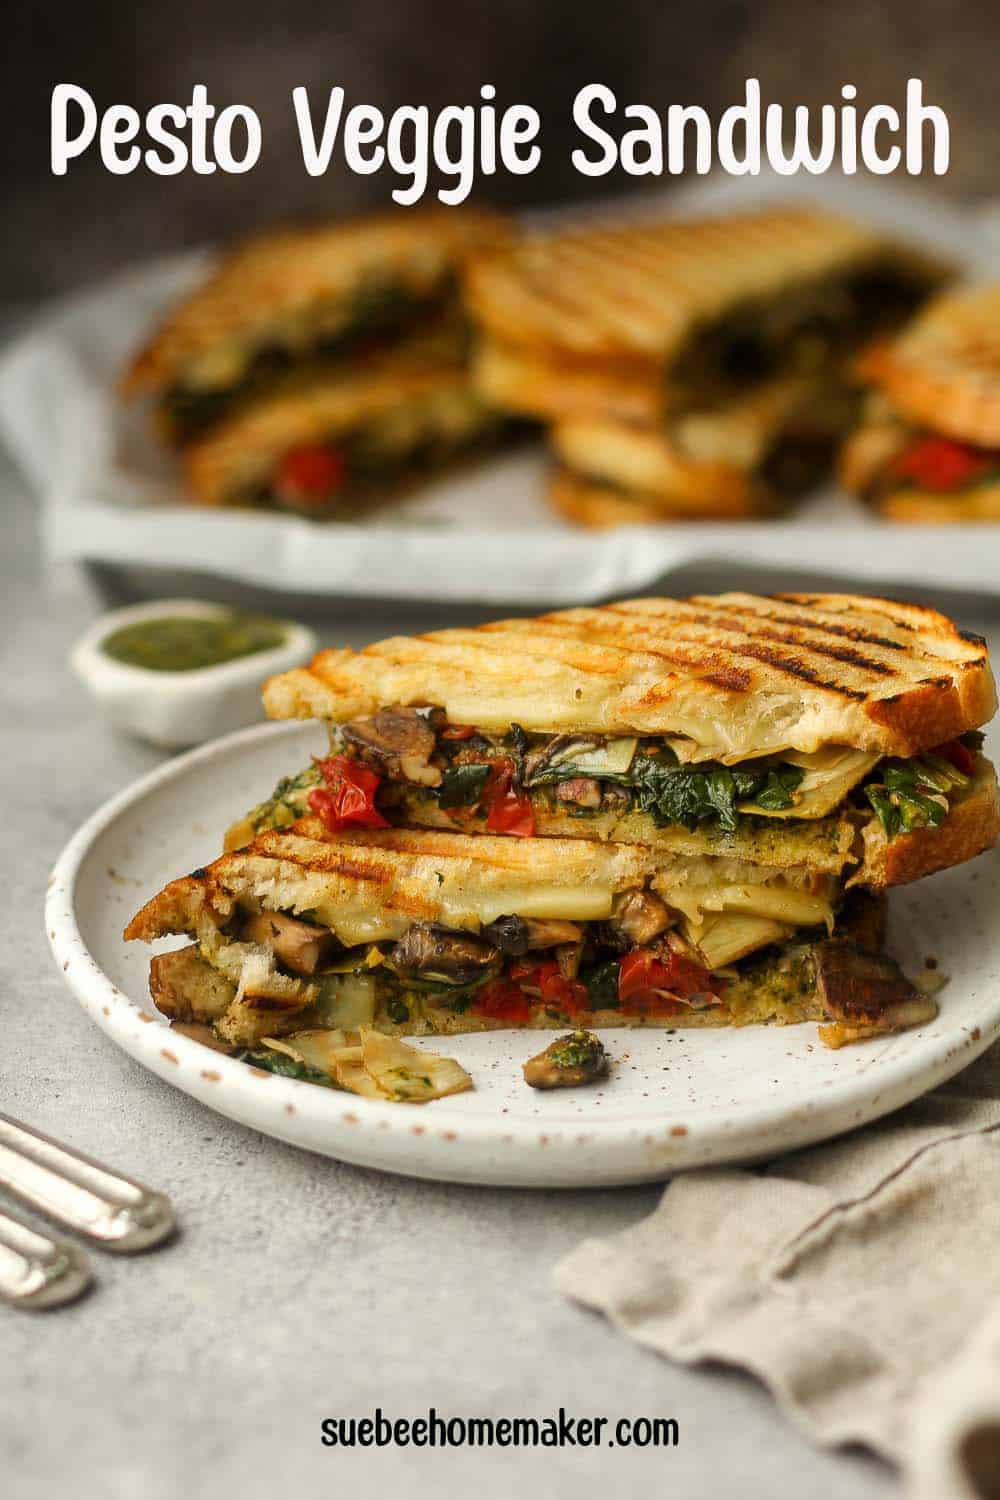 Side view of a plate with a stacked pesto panini with roasted veggies.